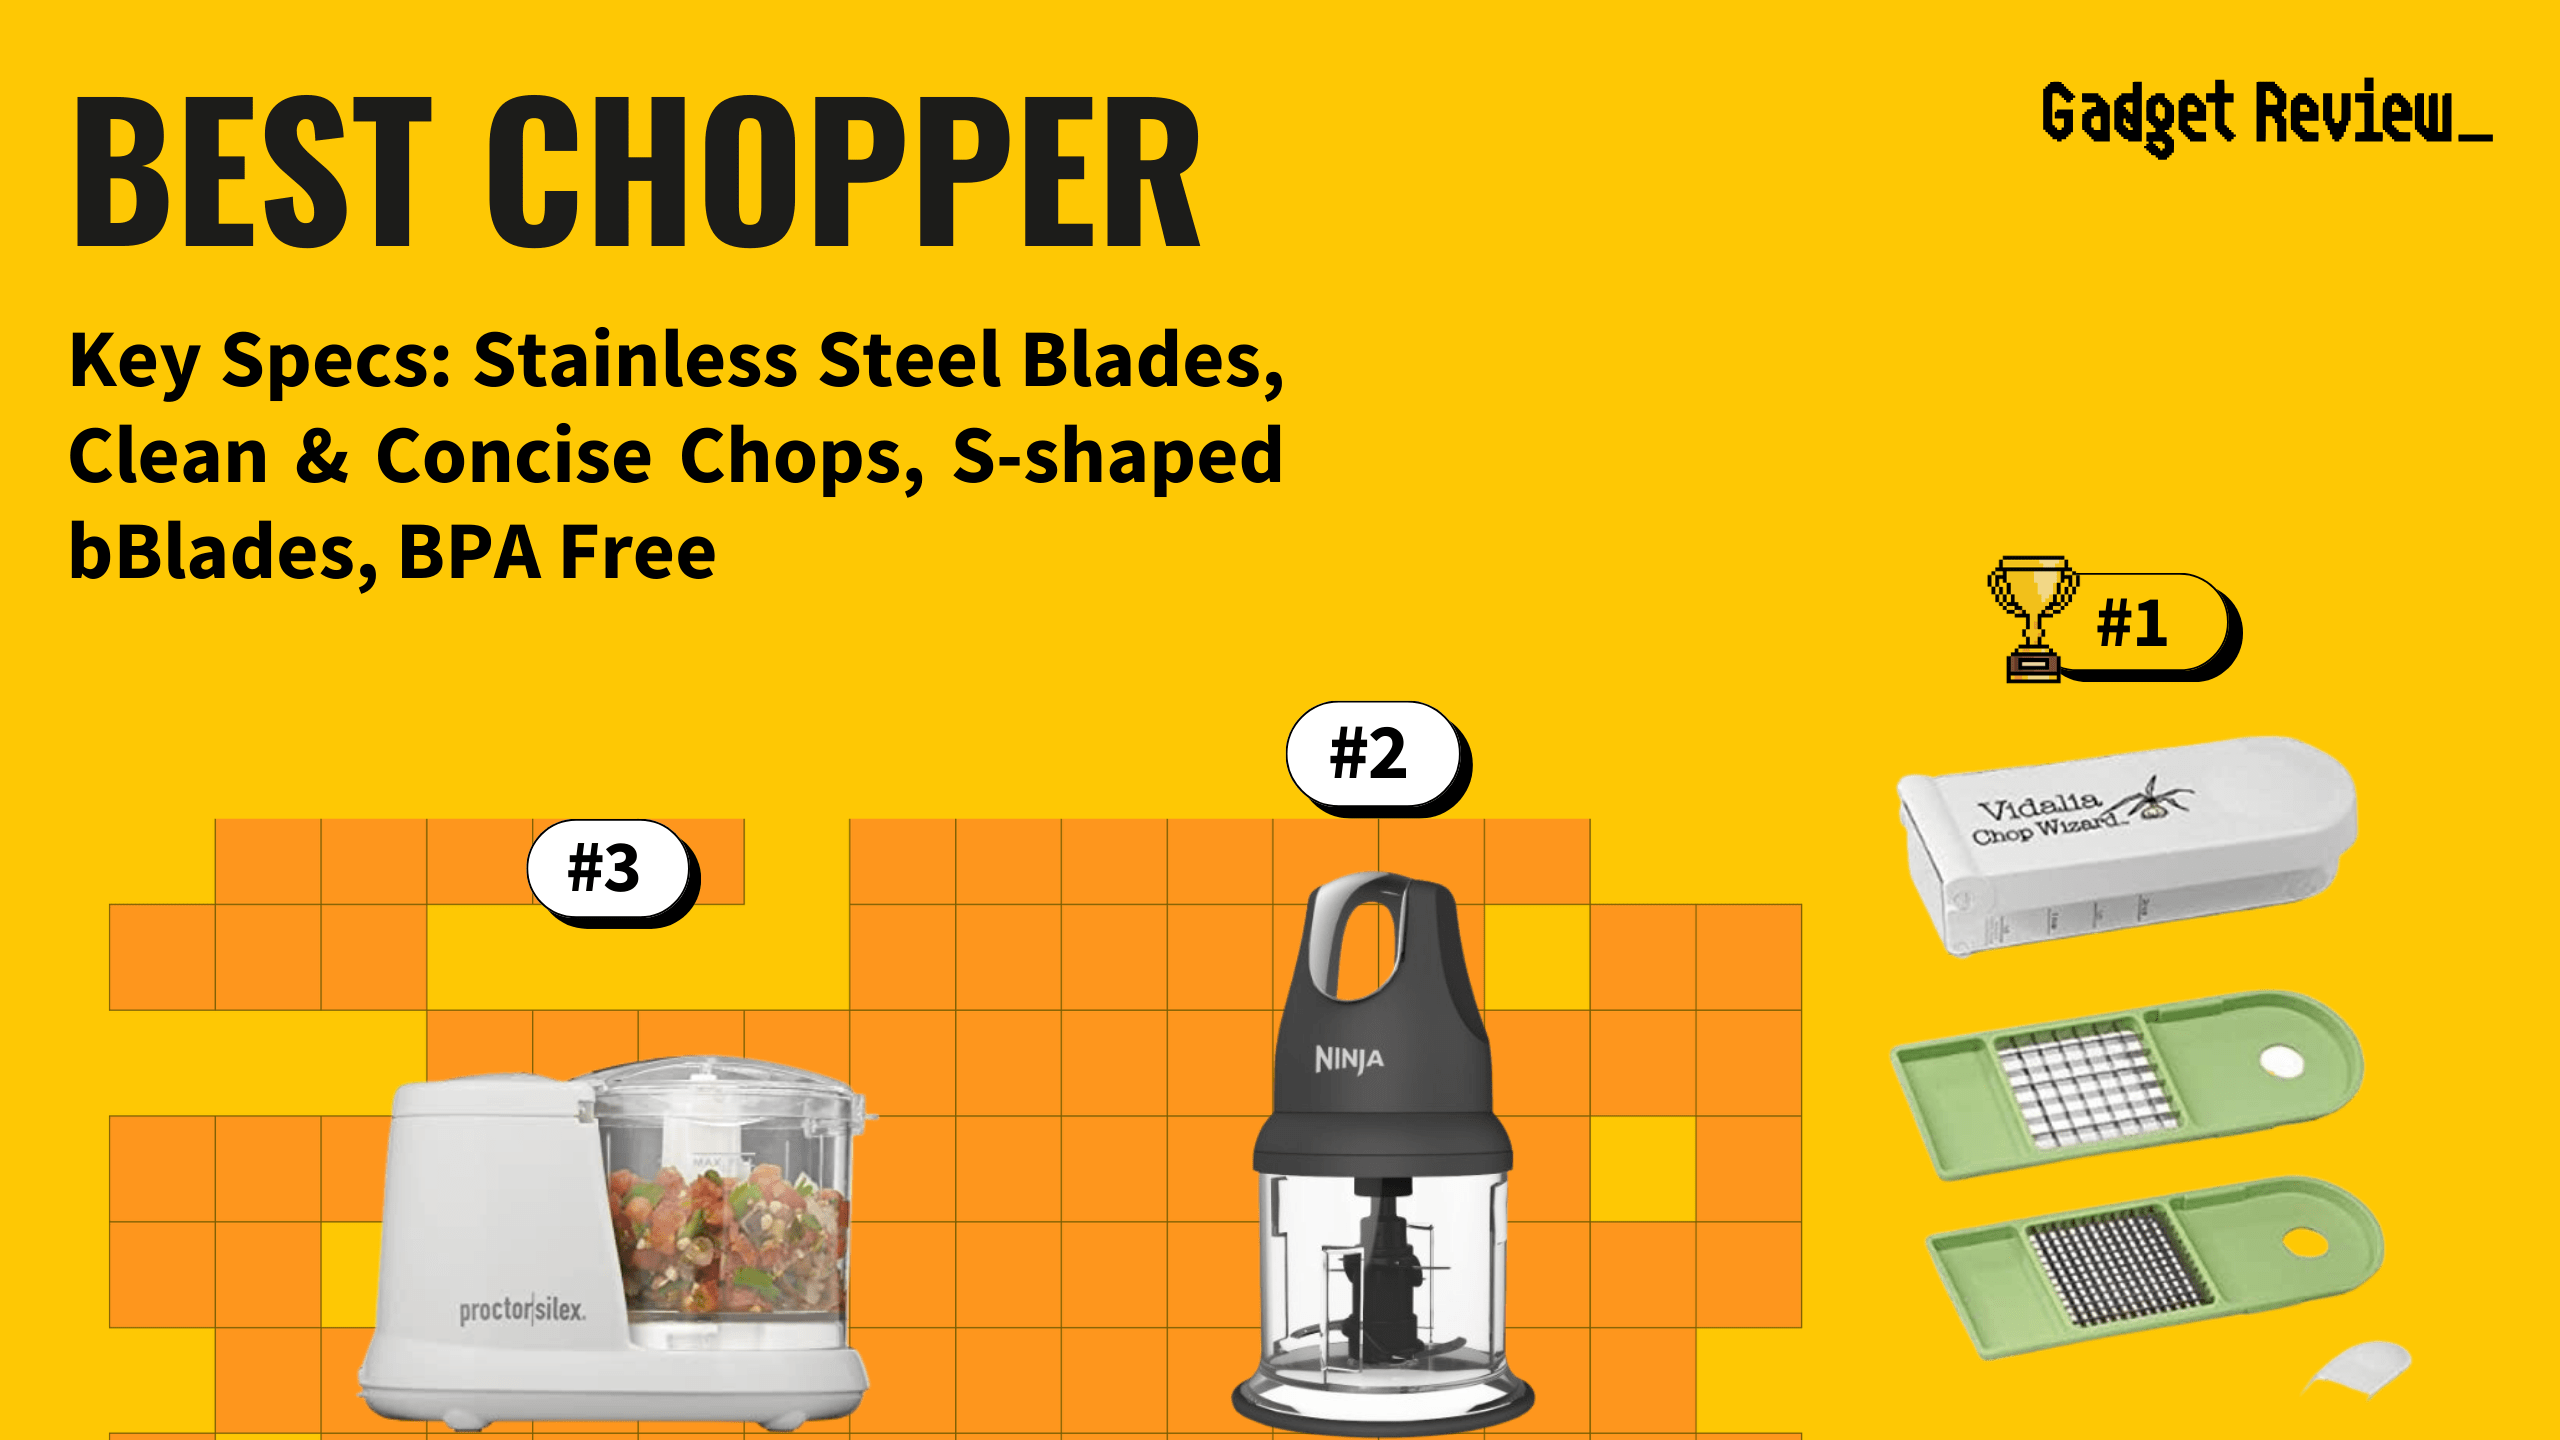 best chopper featured image that shows the top three best kitchen gadget models